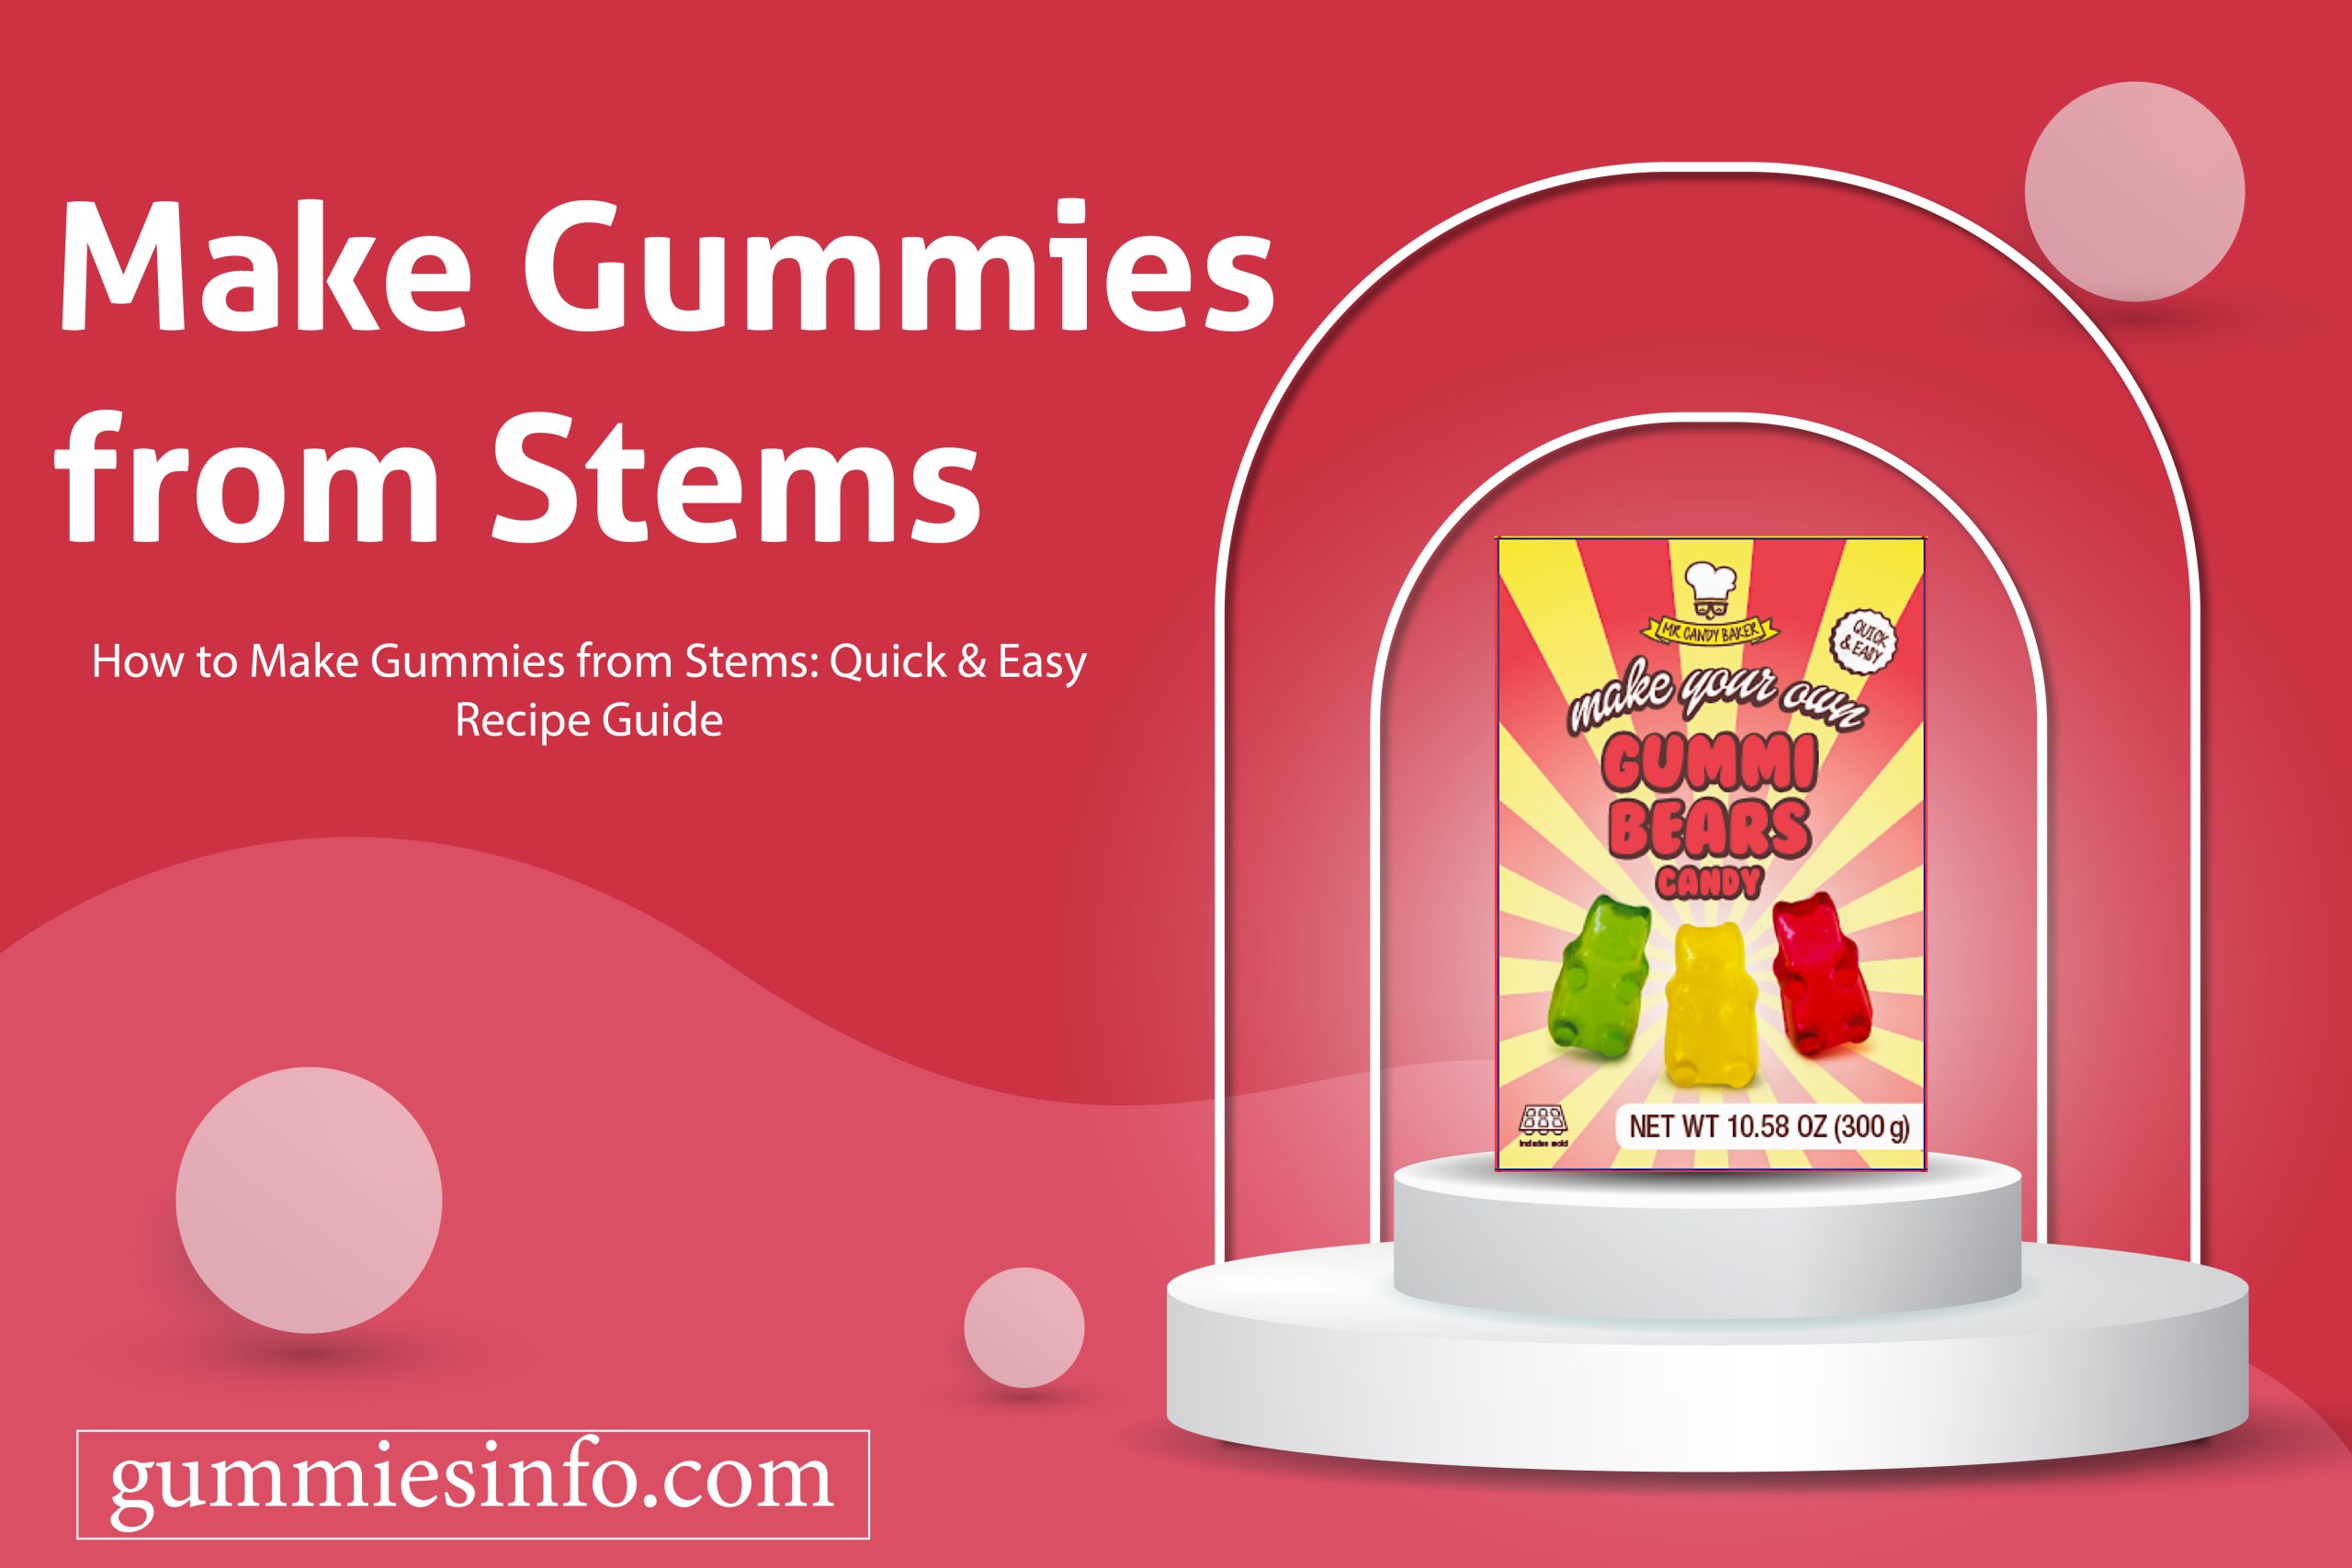 Make Gummies from Stems